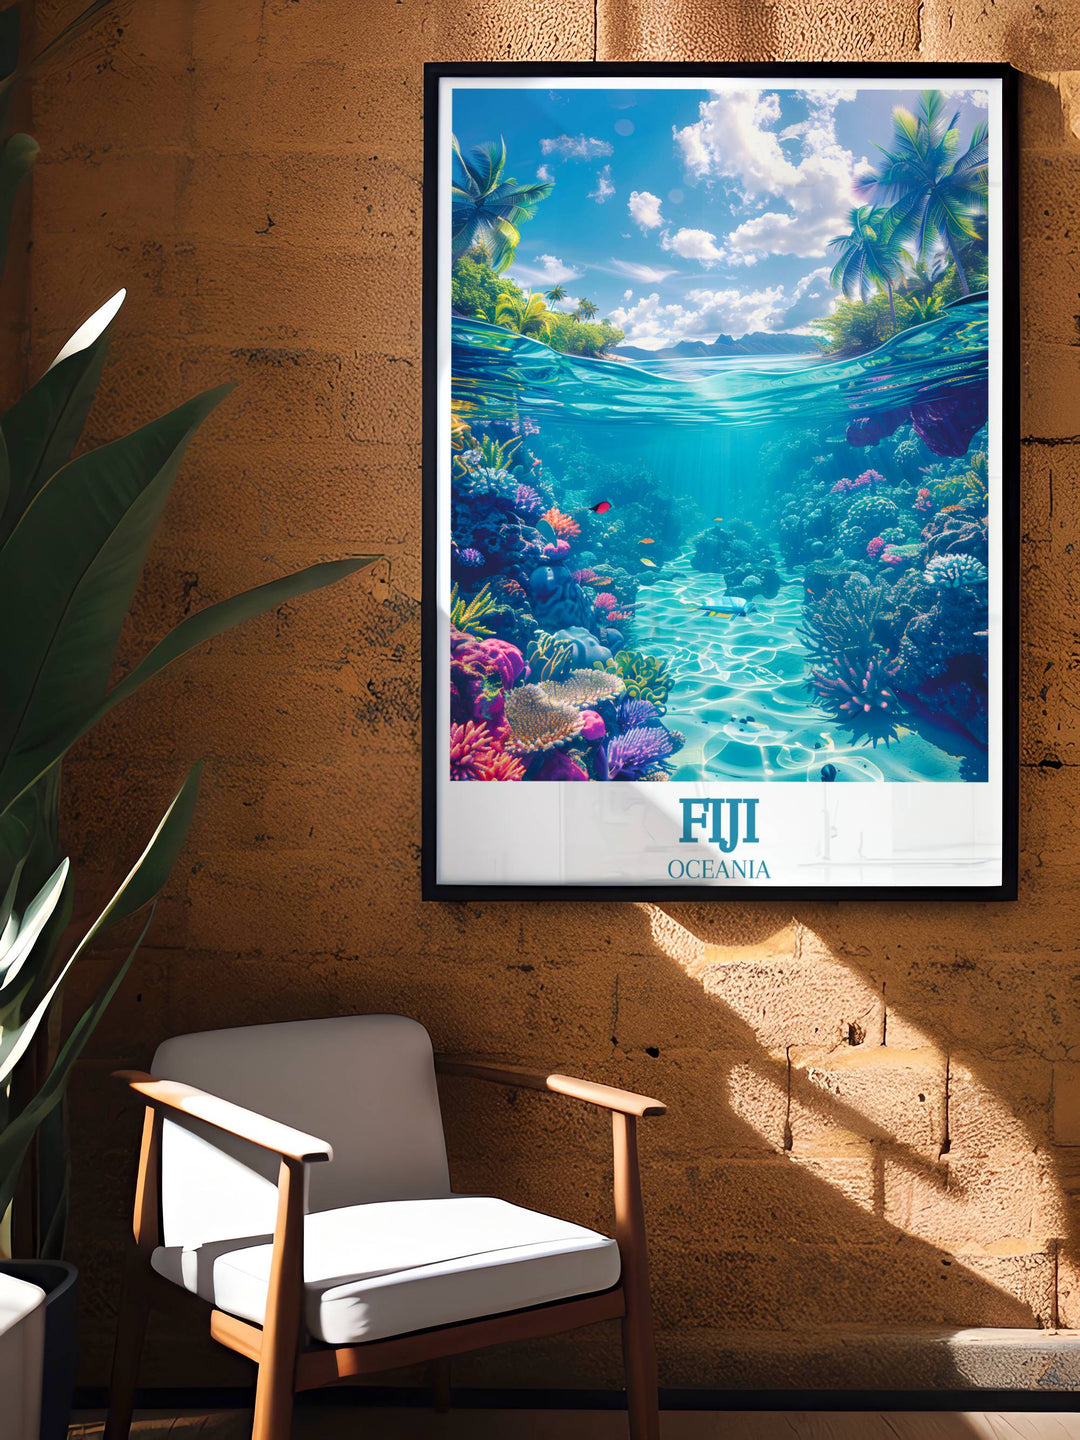 Custom Travel Poster featuring The Great Astrolabe Reef, a thoughtful birthday gift that brings the beauty of Fiji's coast into the home.